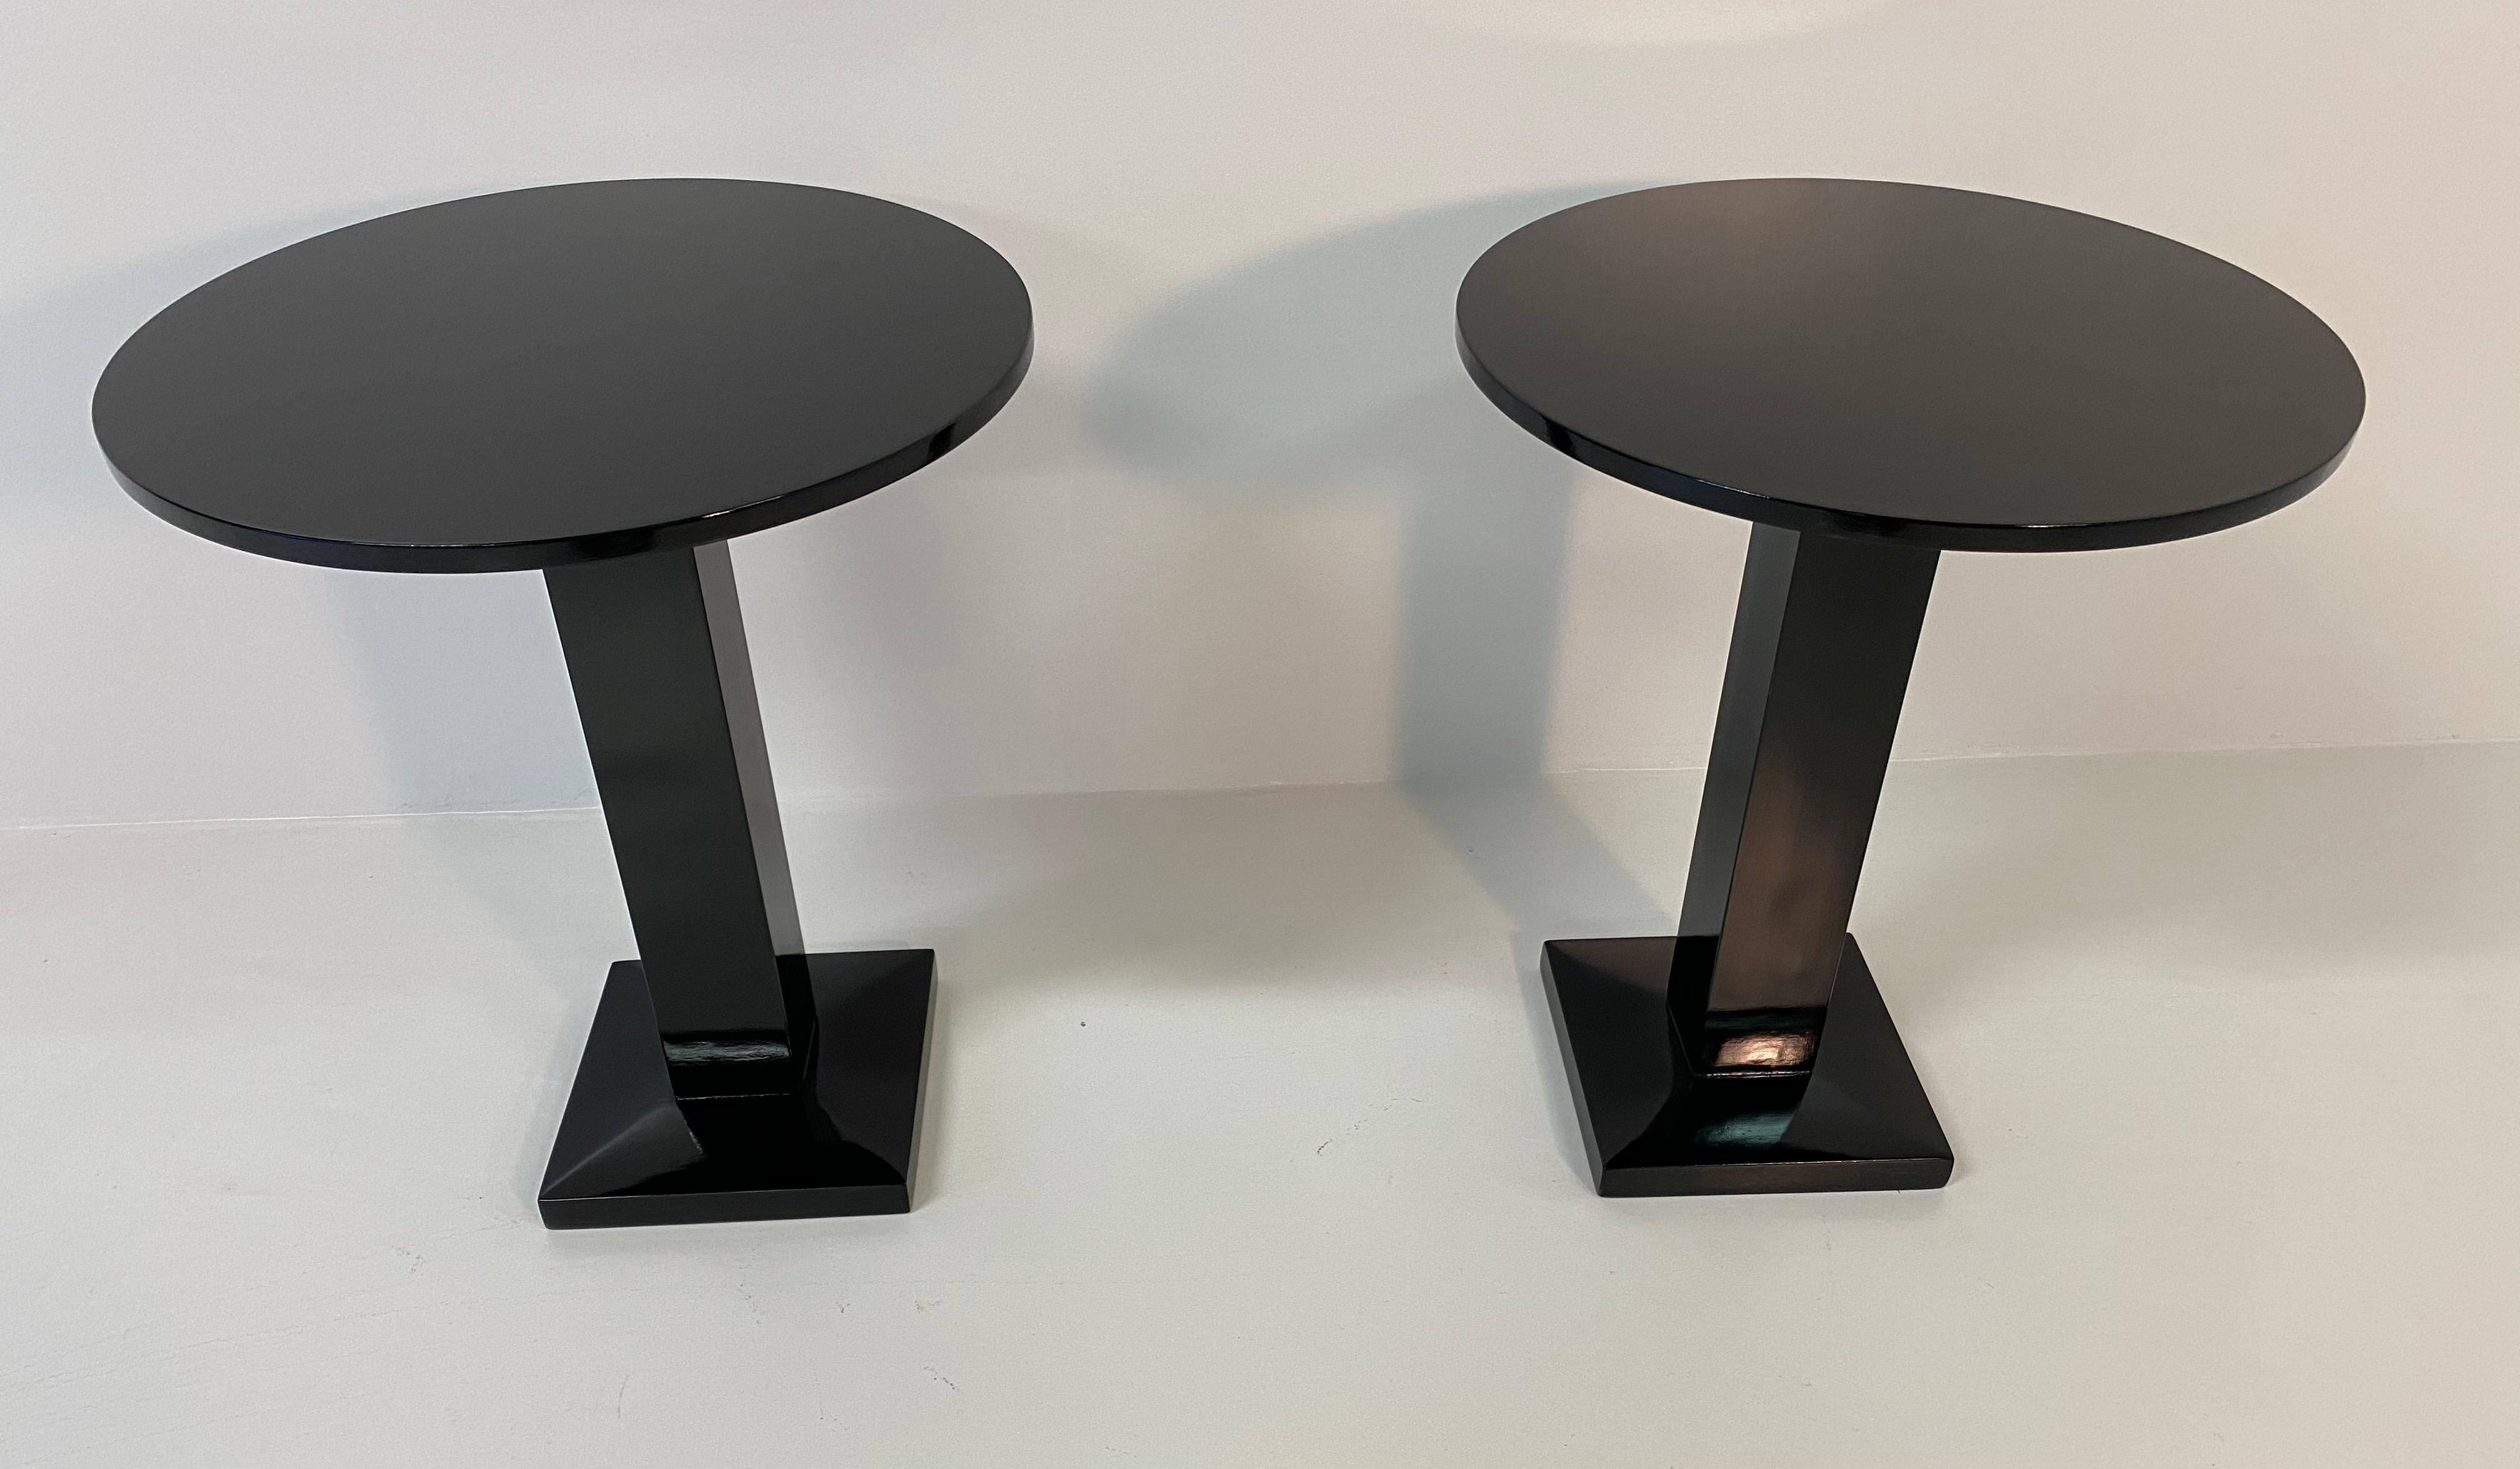 Pair of Italian Art Deco style coffee tables produced in the 1980s.
They are entirely in black lacquered wood.
Fully restored.